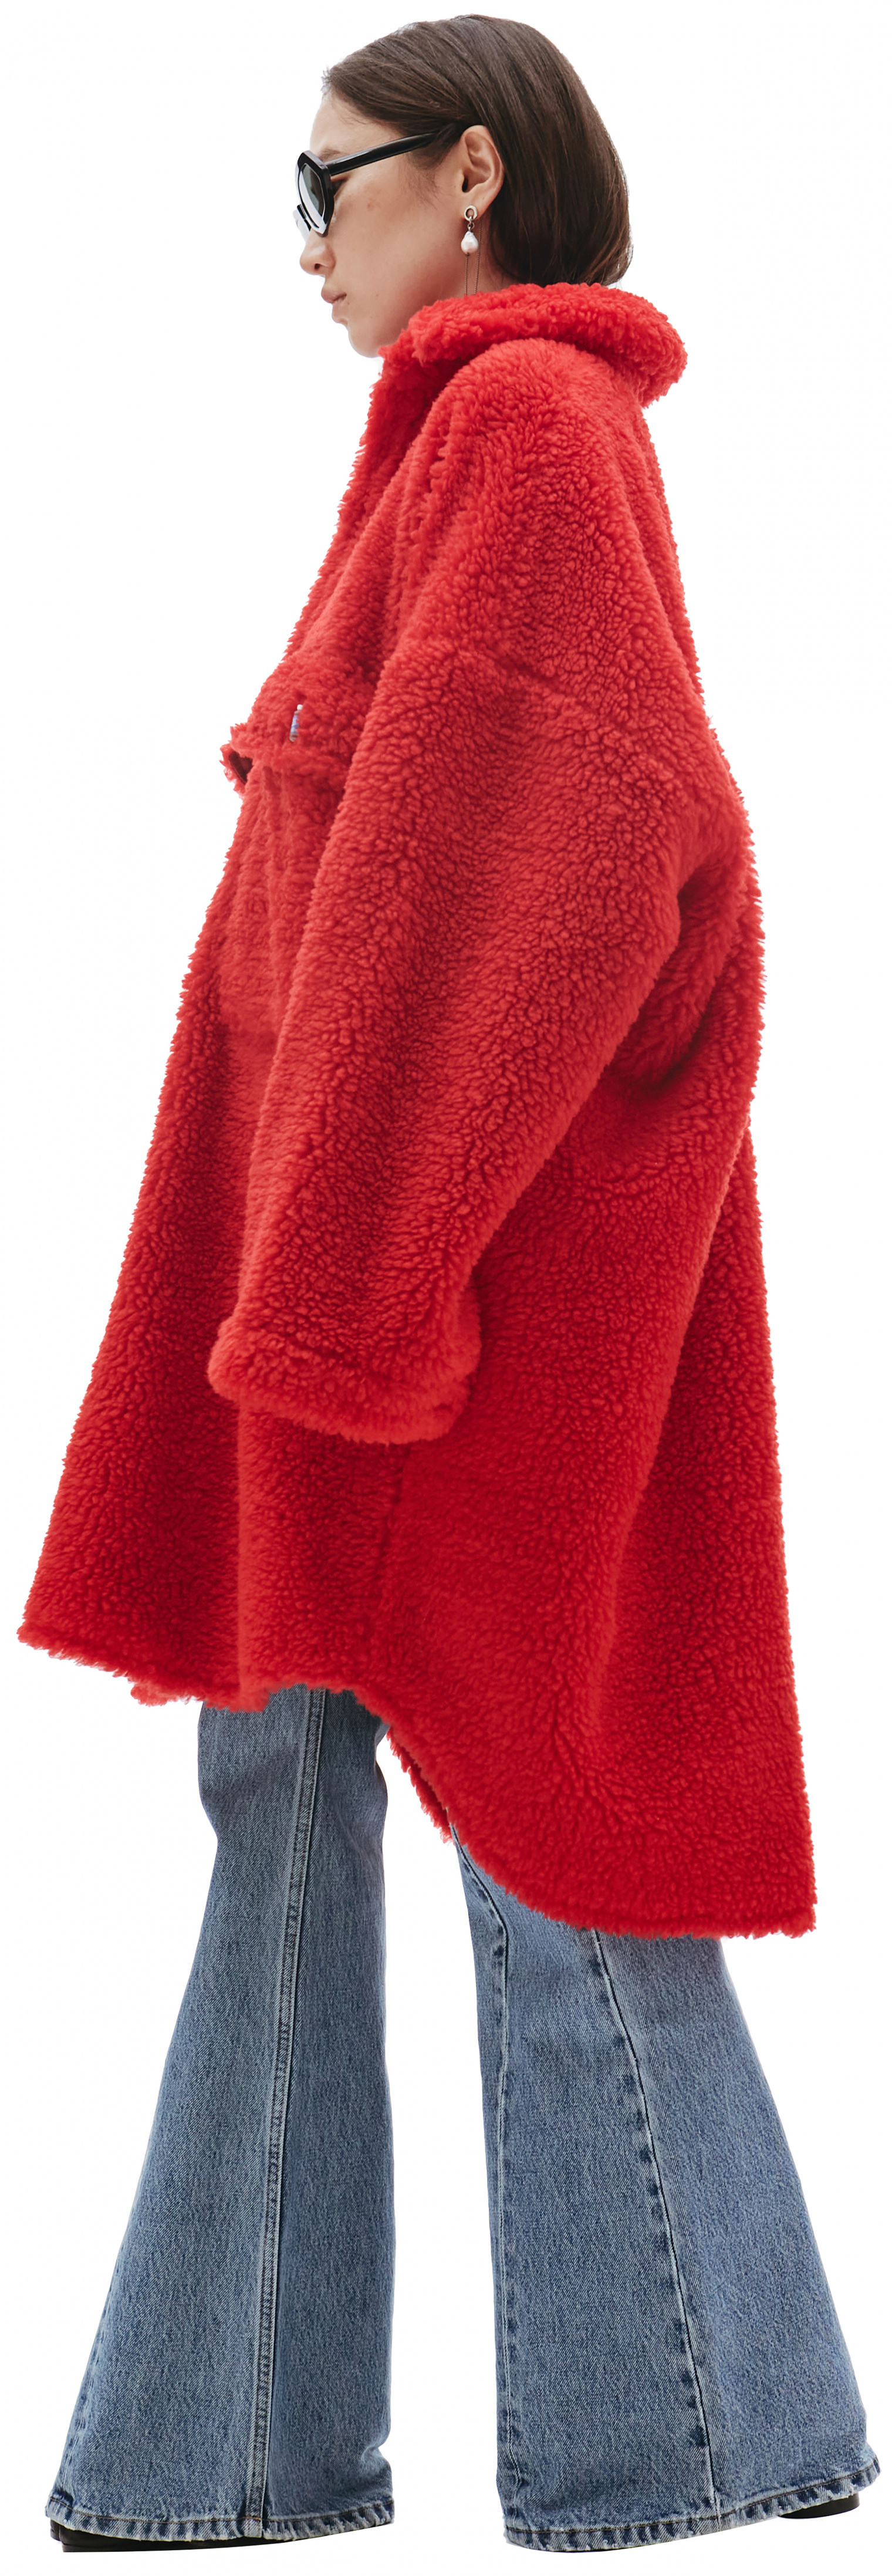 Doublet Recycle Fur Oversized Red Coat